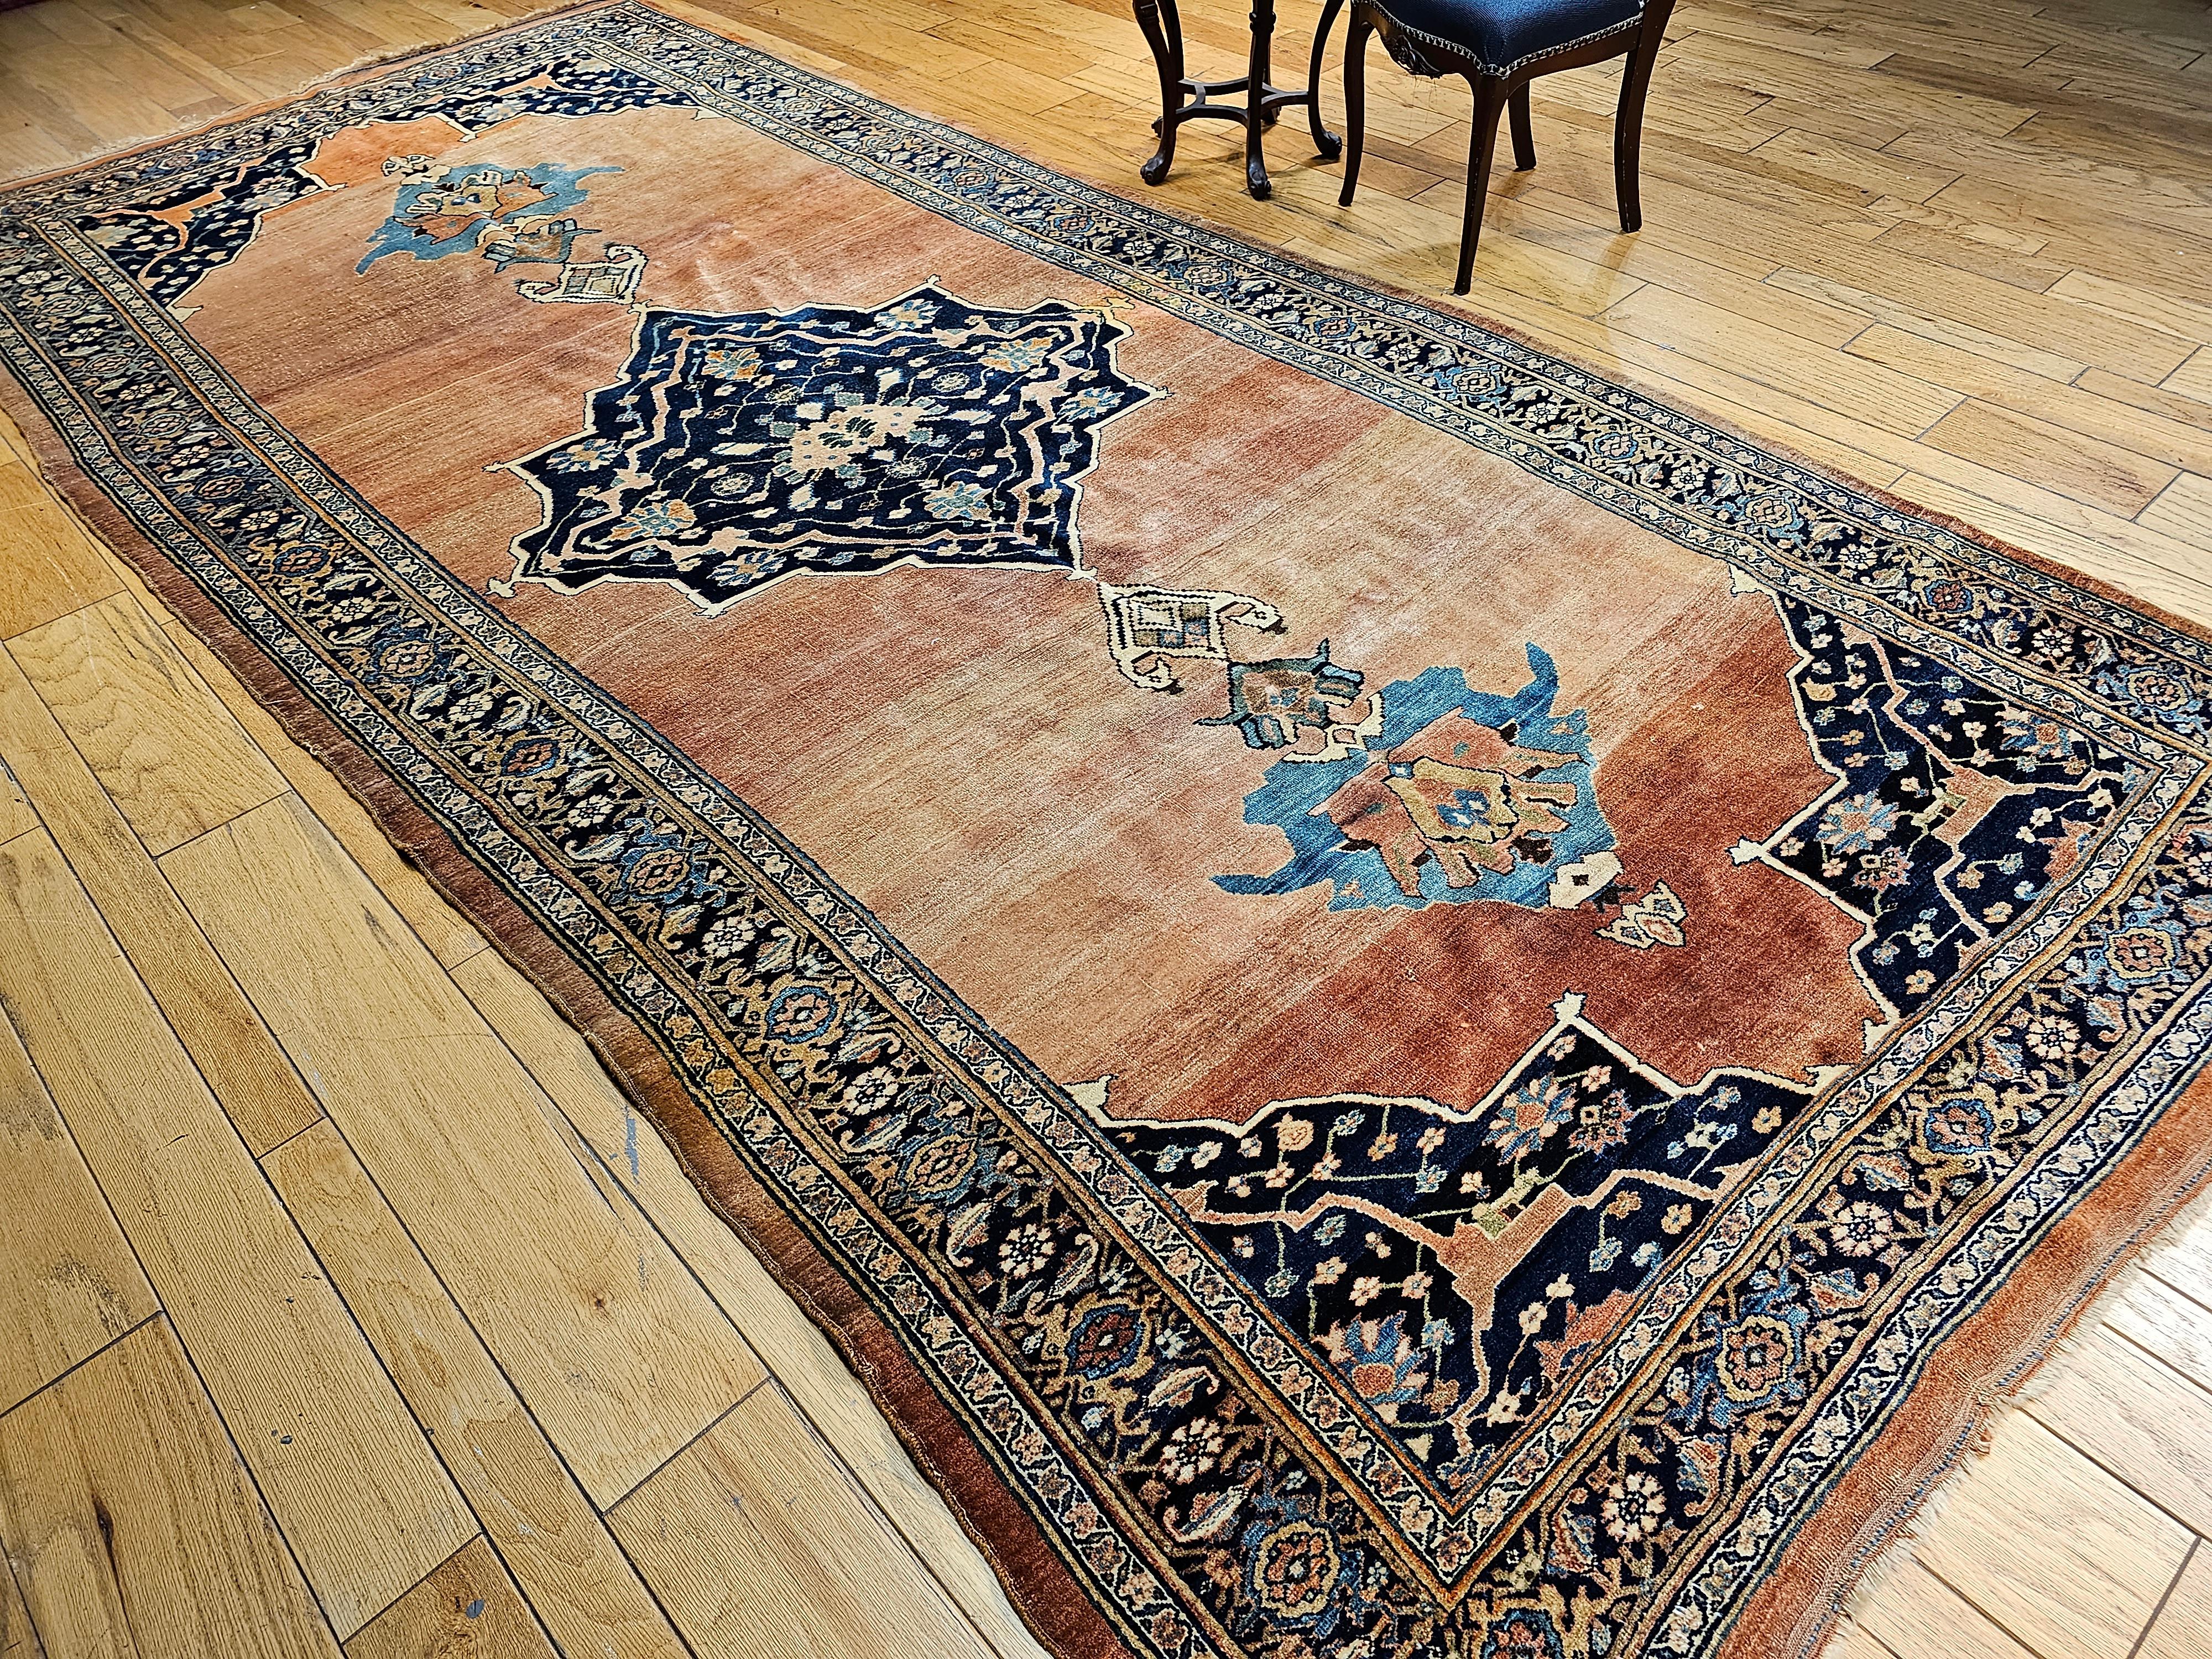 19th Century Persian Bidjar Gallery Rug in Brick-Red, Navy, Turquoise, Yellow For Sale 4